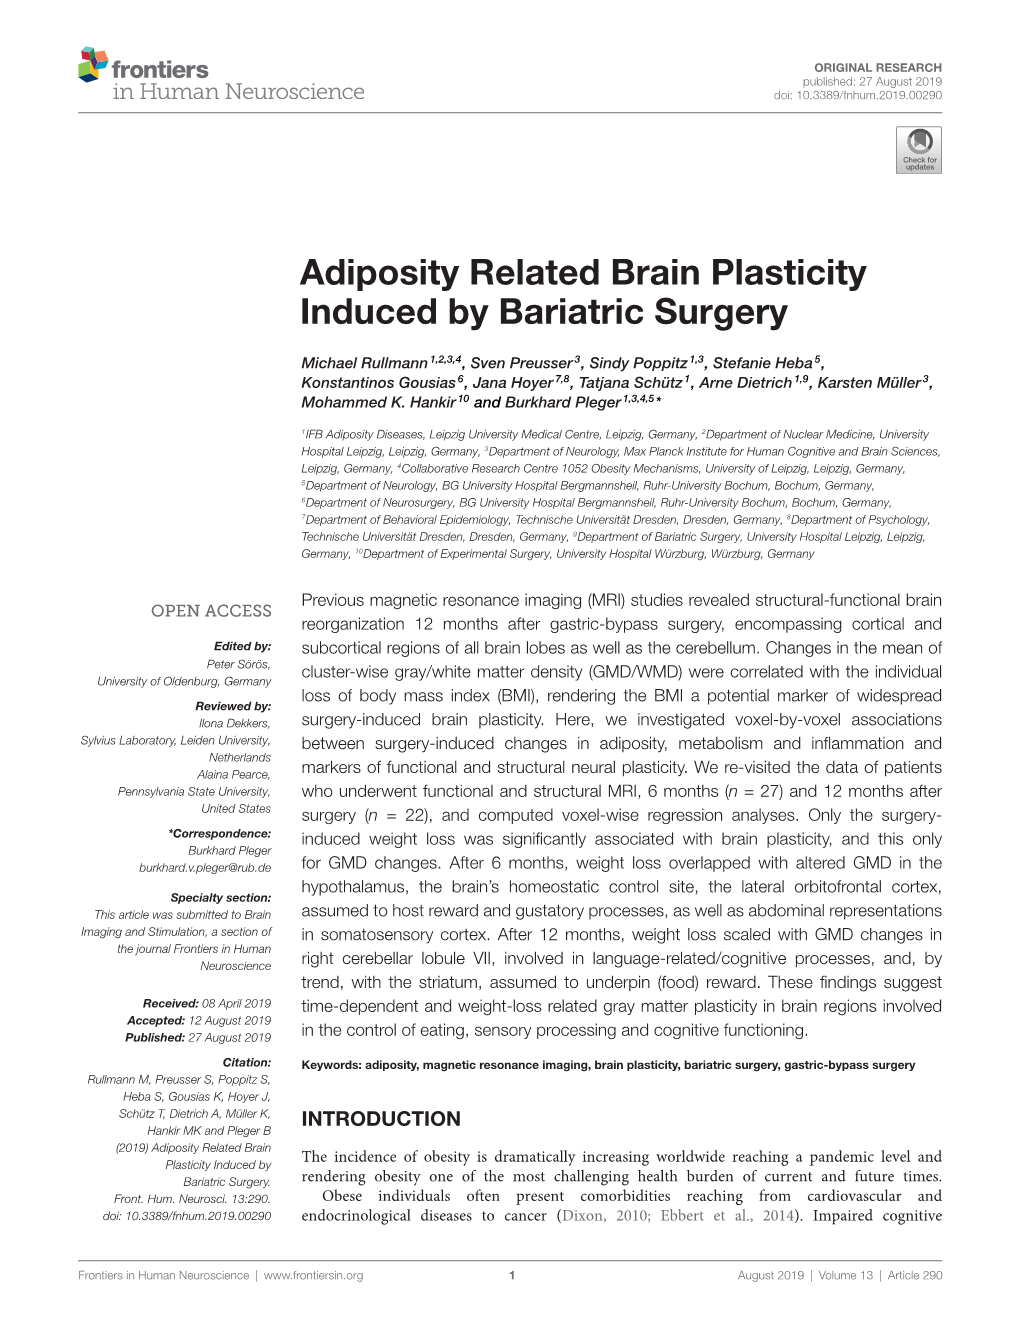 Adiposity Related Brain Plasticity Induced by Bariatric Surgery